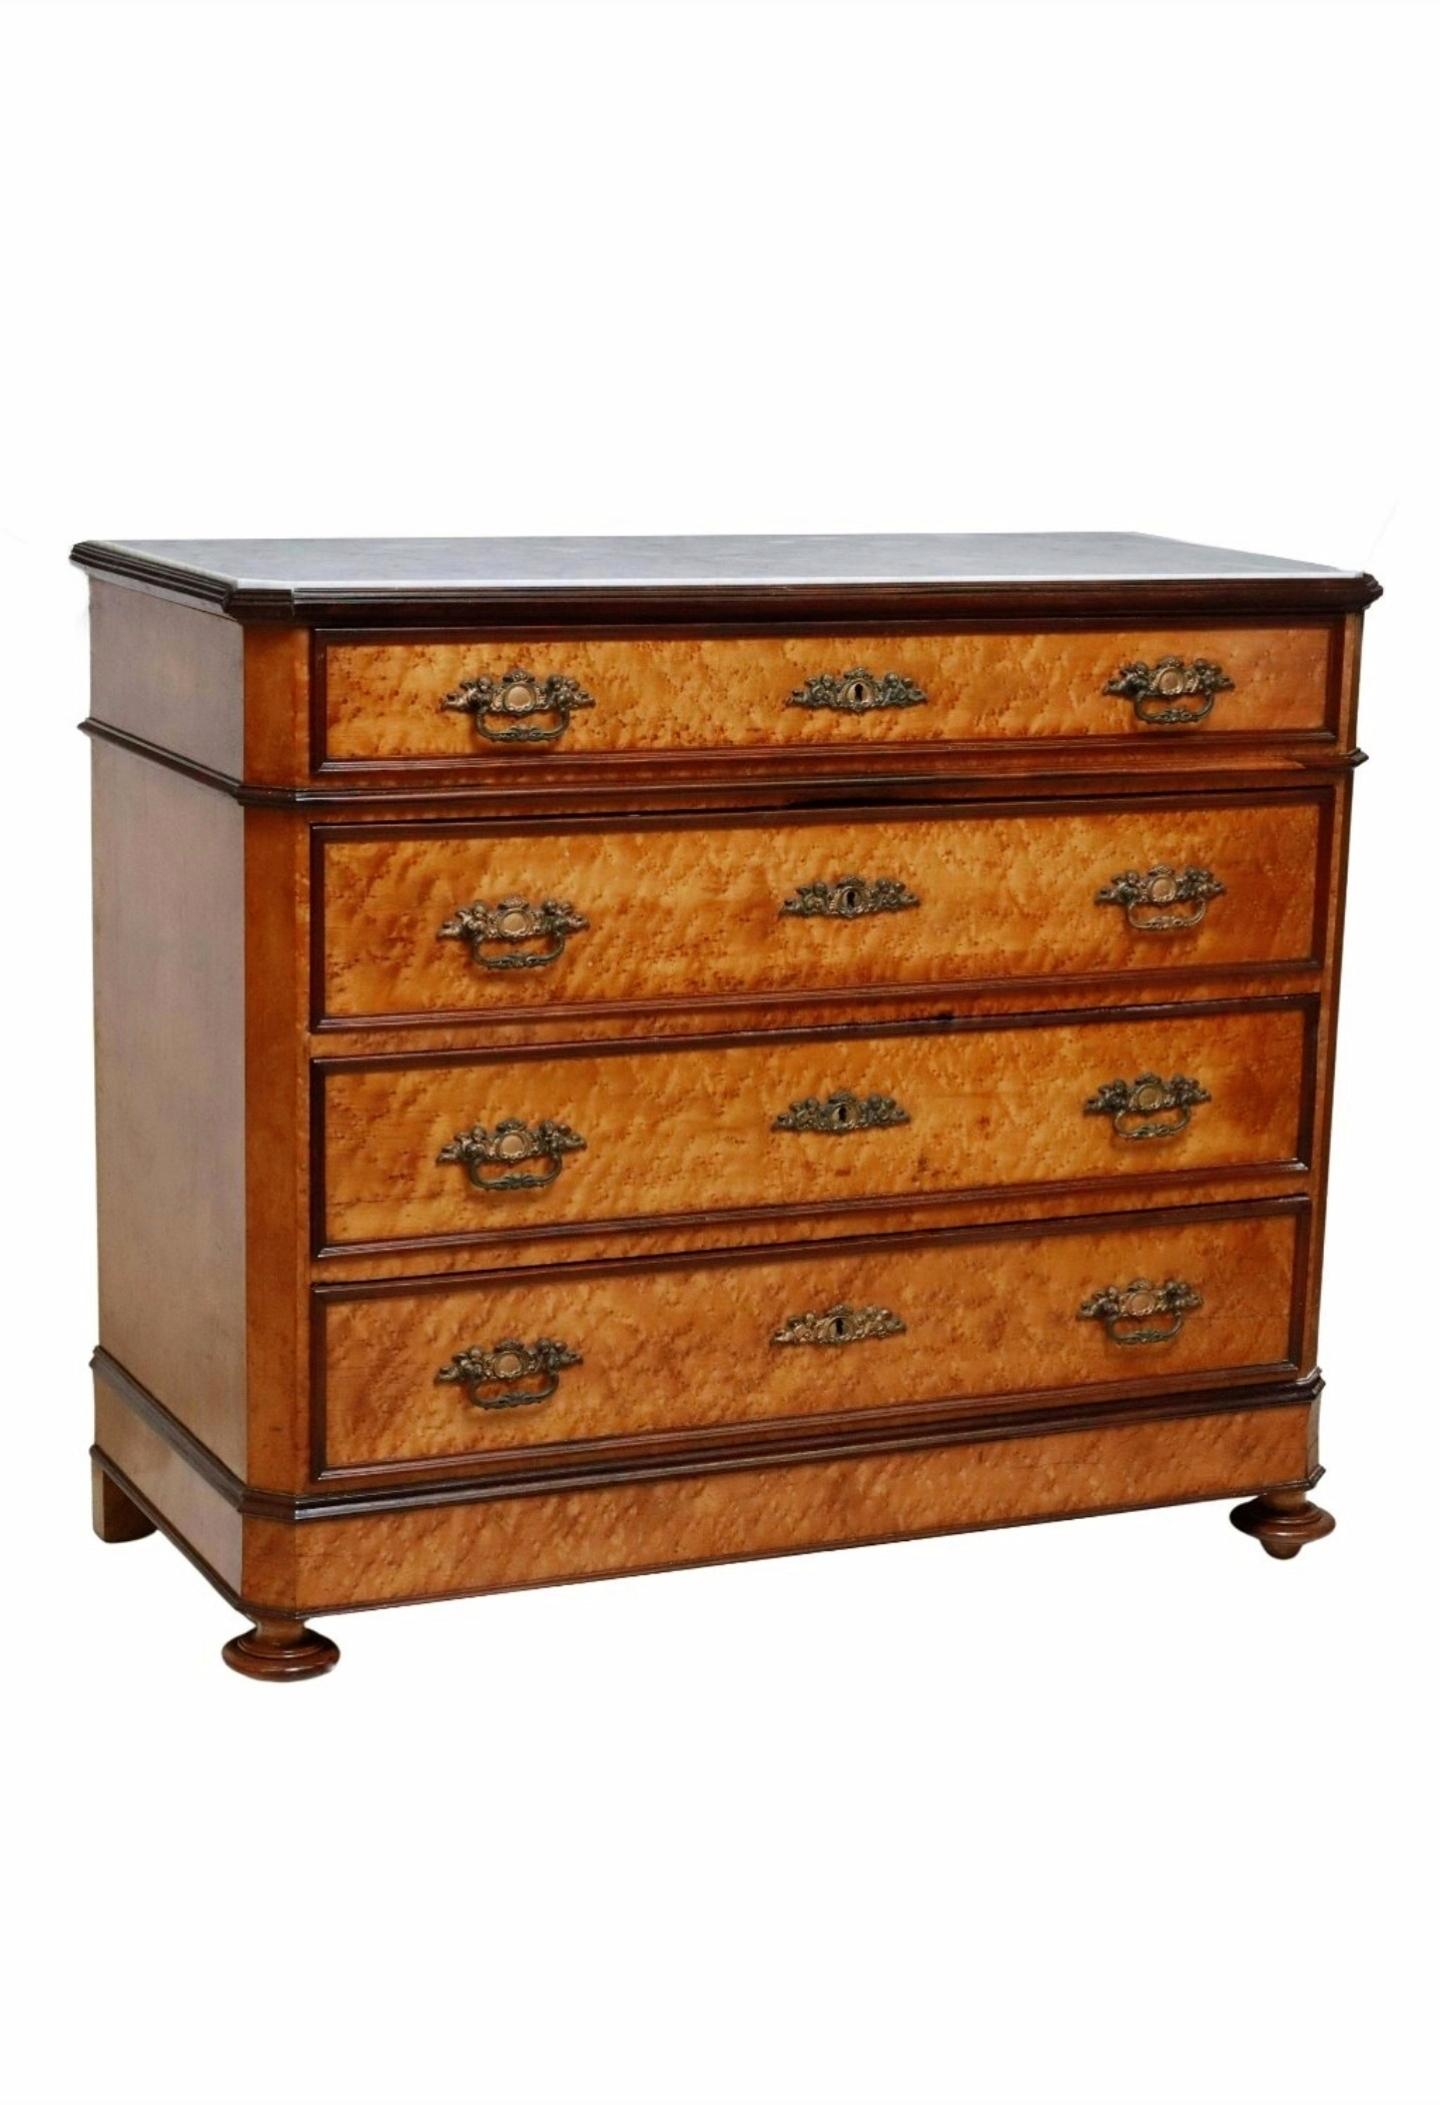 A stunning fine quality antique, circa 1860s/1870s Italian chest of drawers commode. 

Hand-crafted in Italy in the third quarter of the 19th century, influenced by Napoleon III Second Empire Period (1852-1870) in France, having a rectangular top